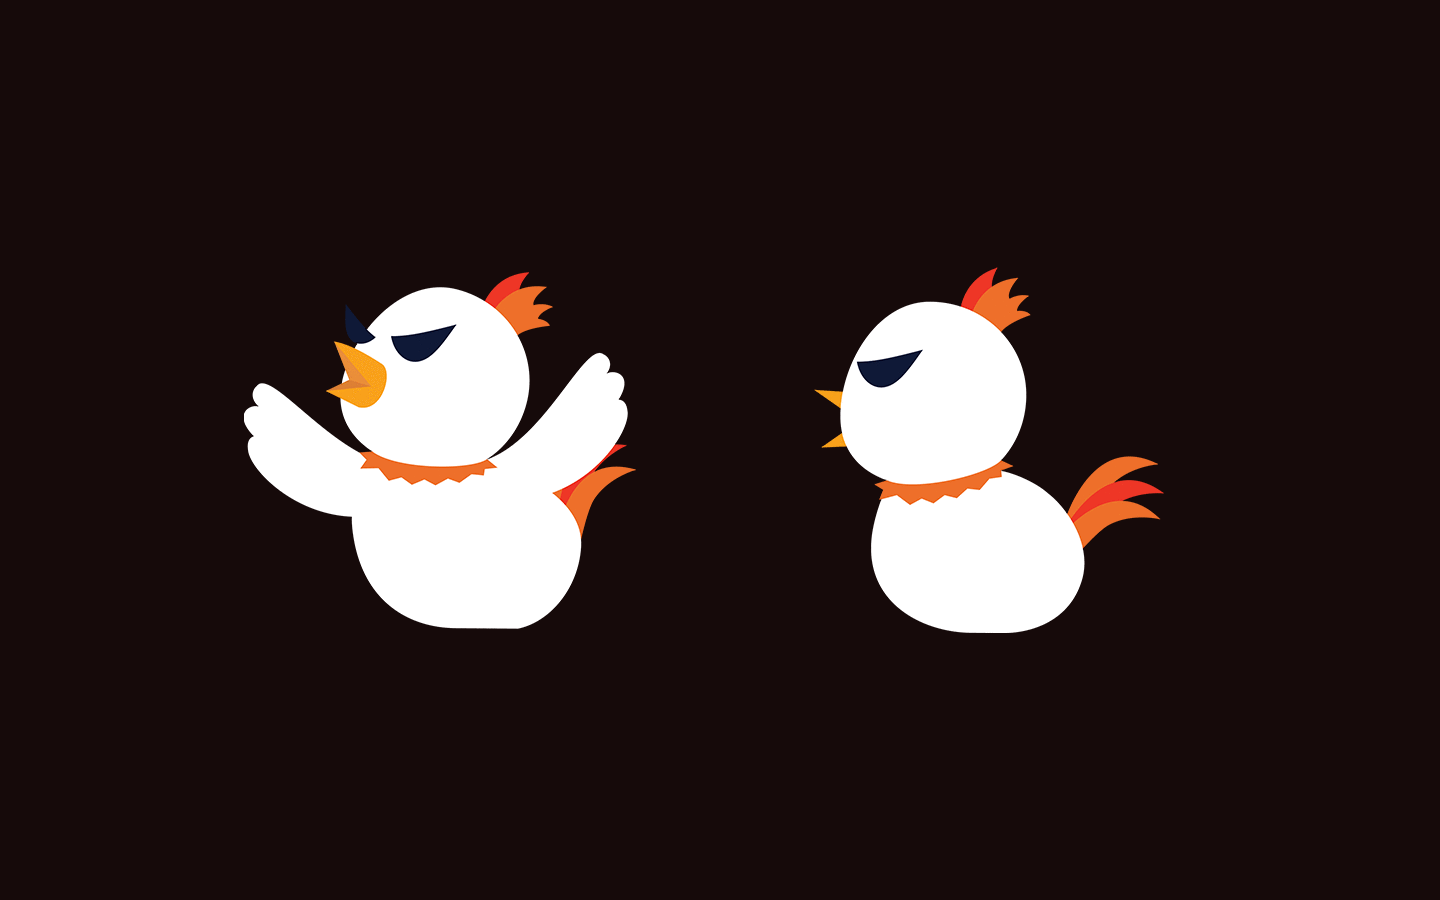 image of a character turn around for the chicken of the explainer video